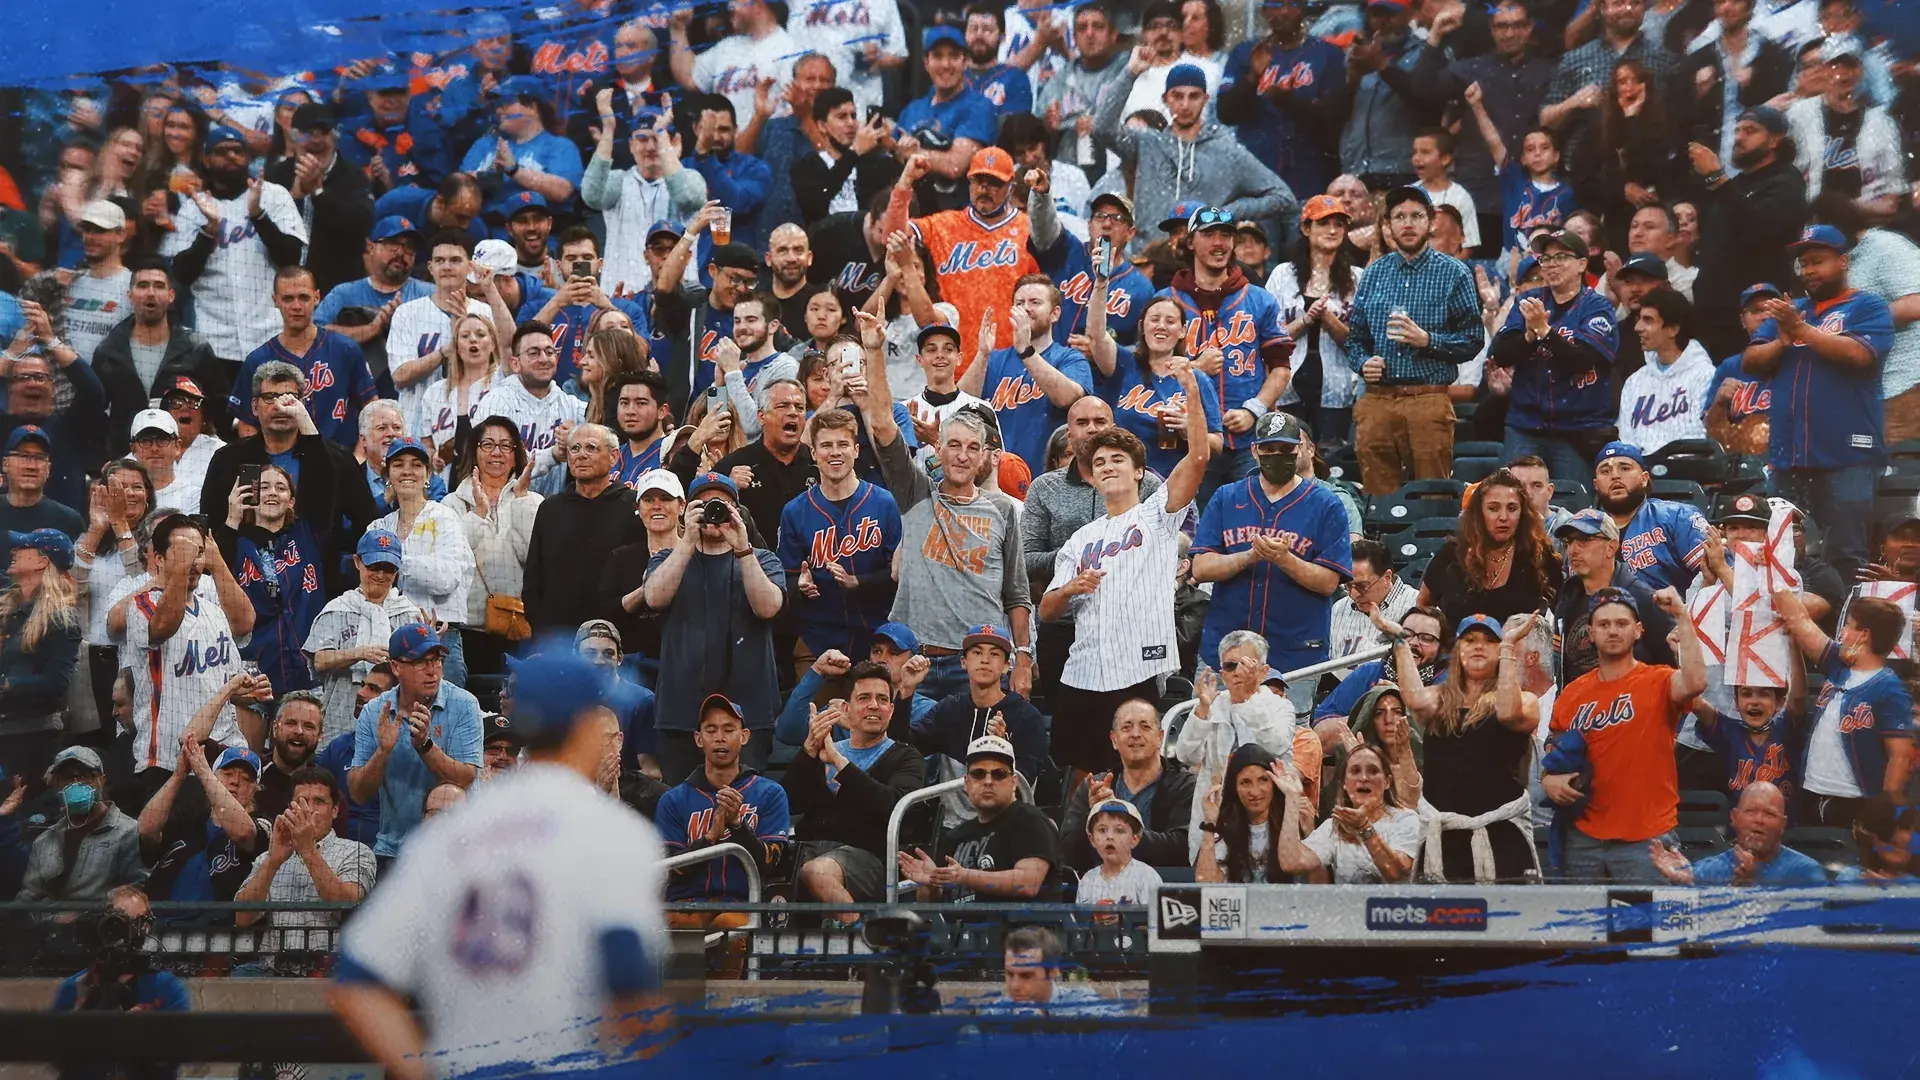 Mets fans at game with Jacob deGrom pitching. / USA TODAY Sports/SNY Treated Image